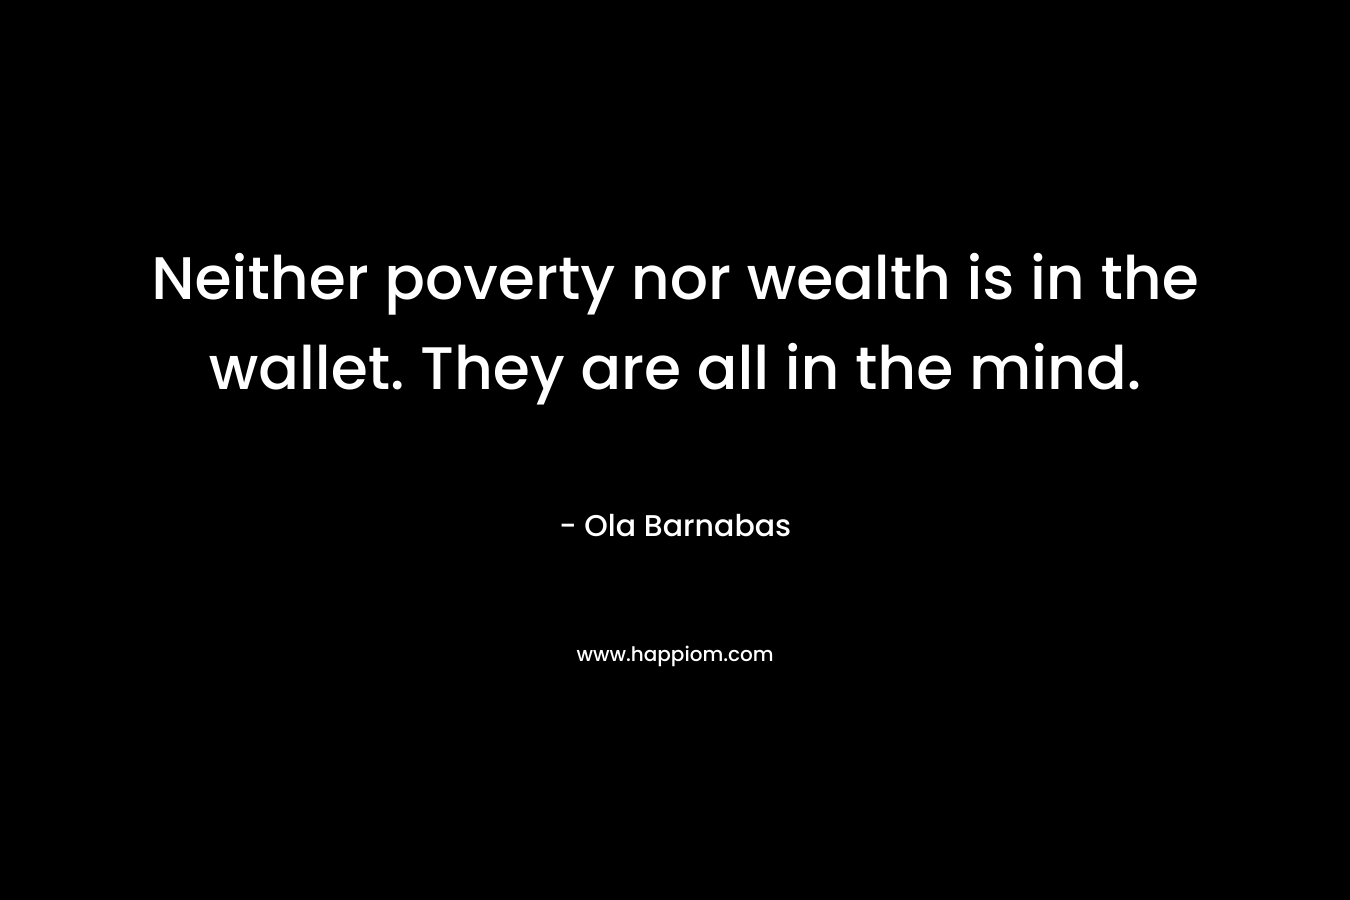 Neither poverty nor wealth is in the wallet. They are all in the mind.